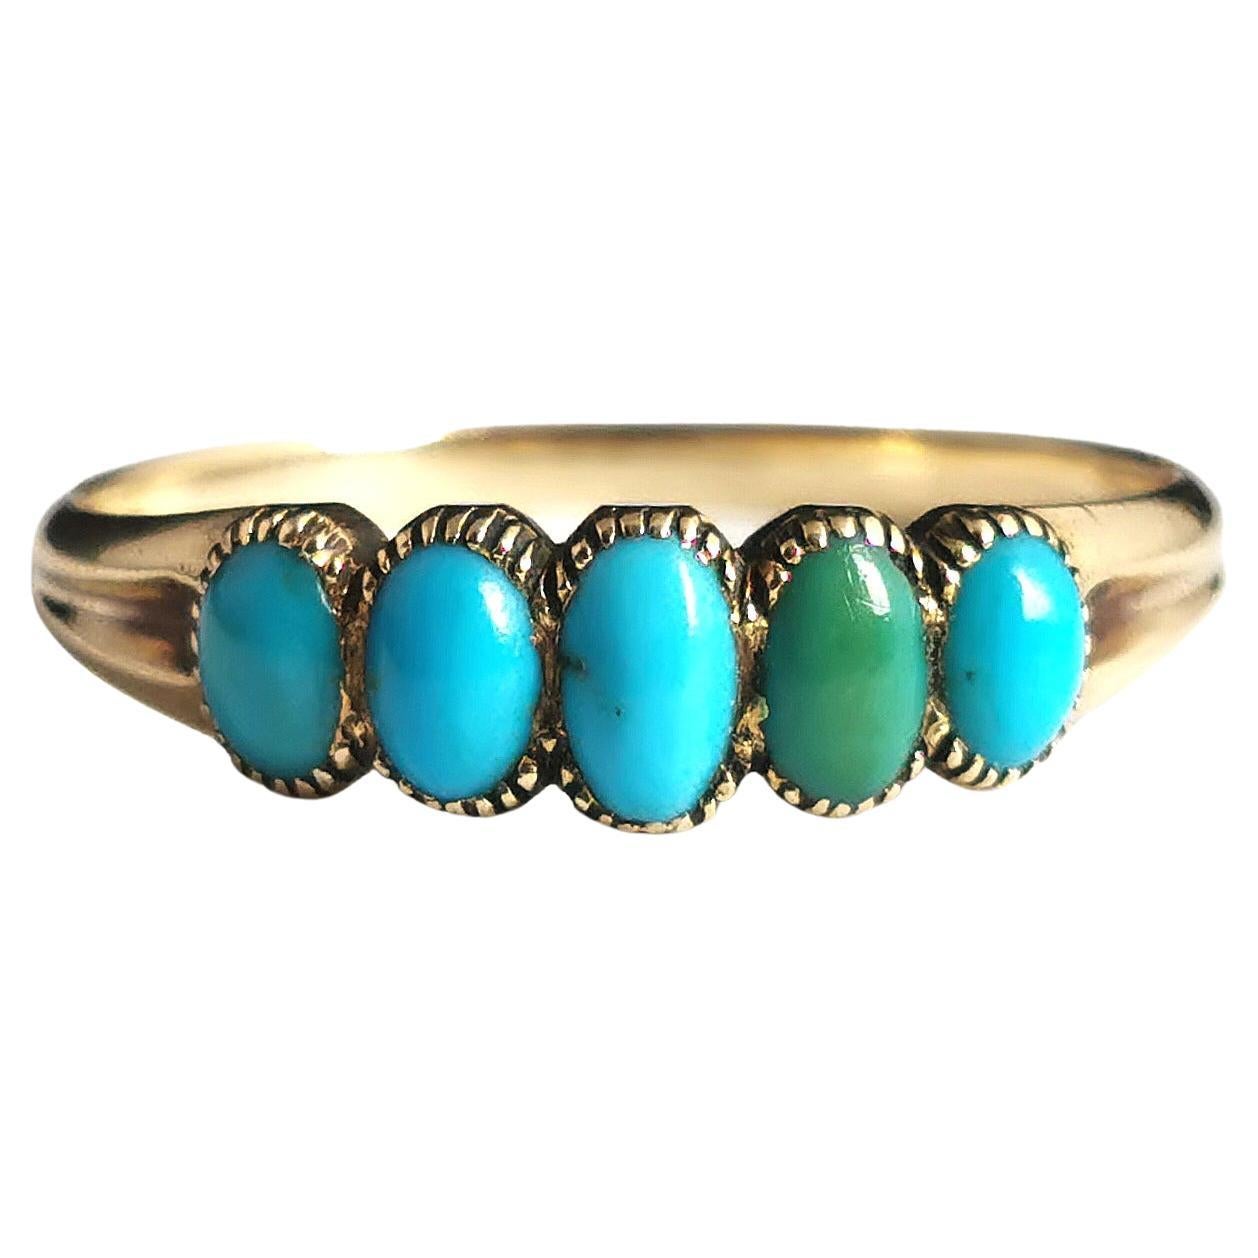 Antique Victorian Five Stone Turquoise Ring, 18k Yellow Gold